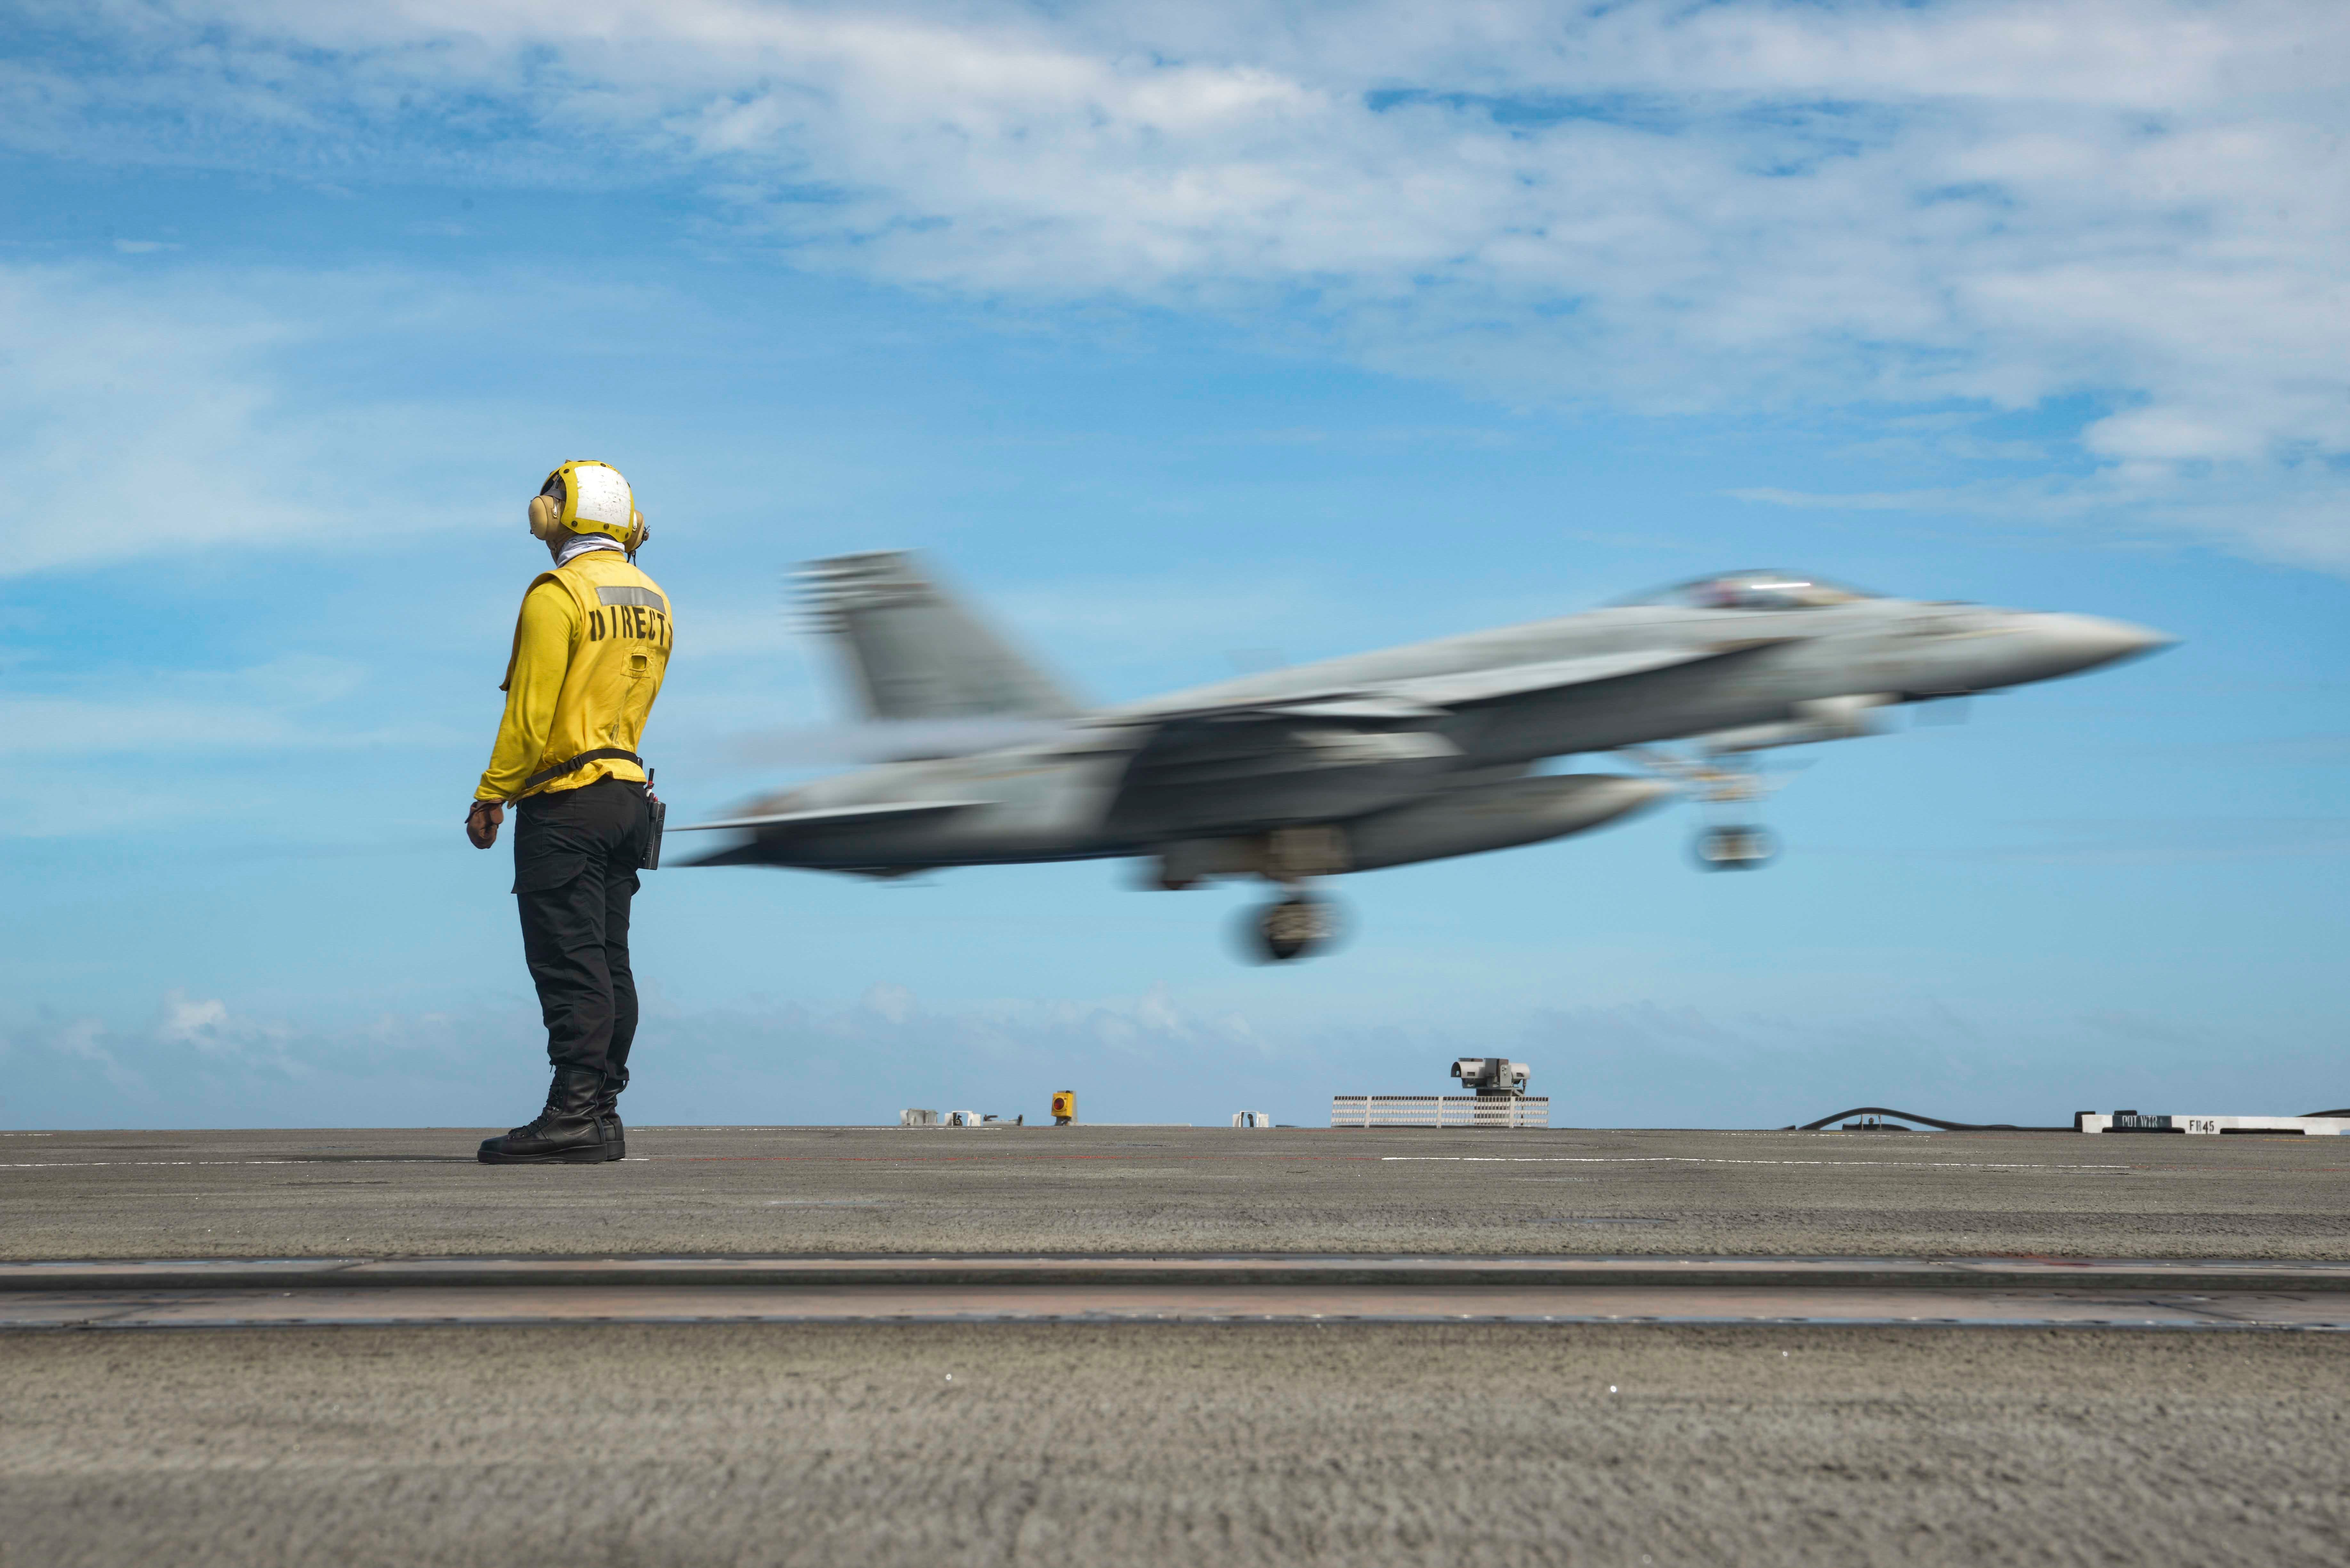 TAKE OFF. A fighter jet takes off from the American carrier USS Ronald Reagan in the Philippine Sea on May 26, 2020. Handout photo from the US Navy 